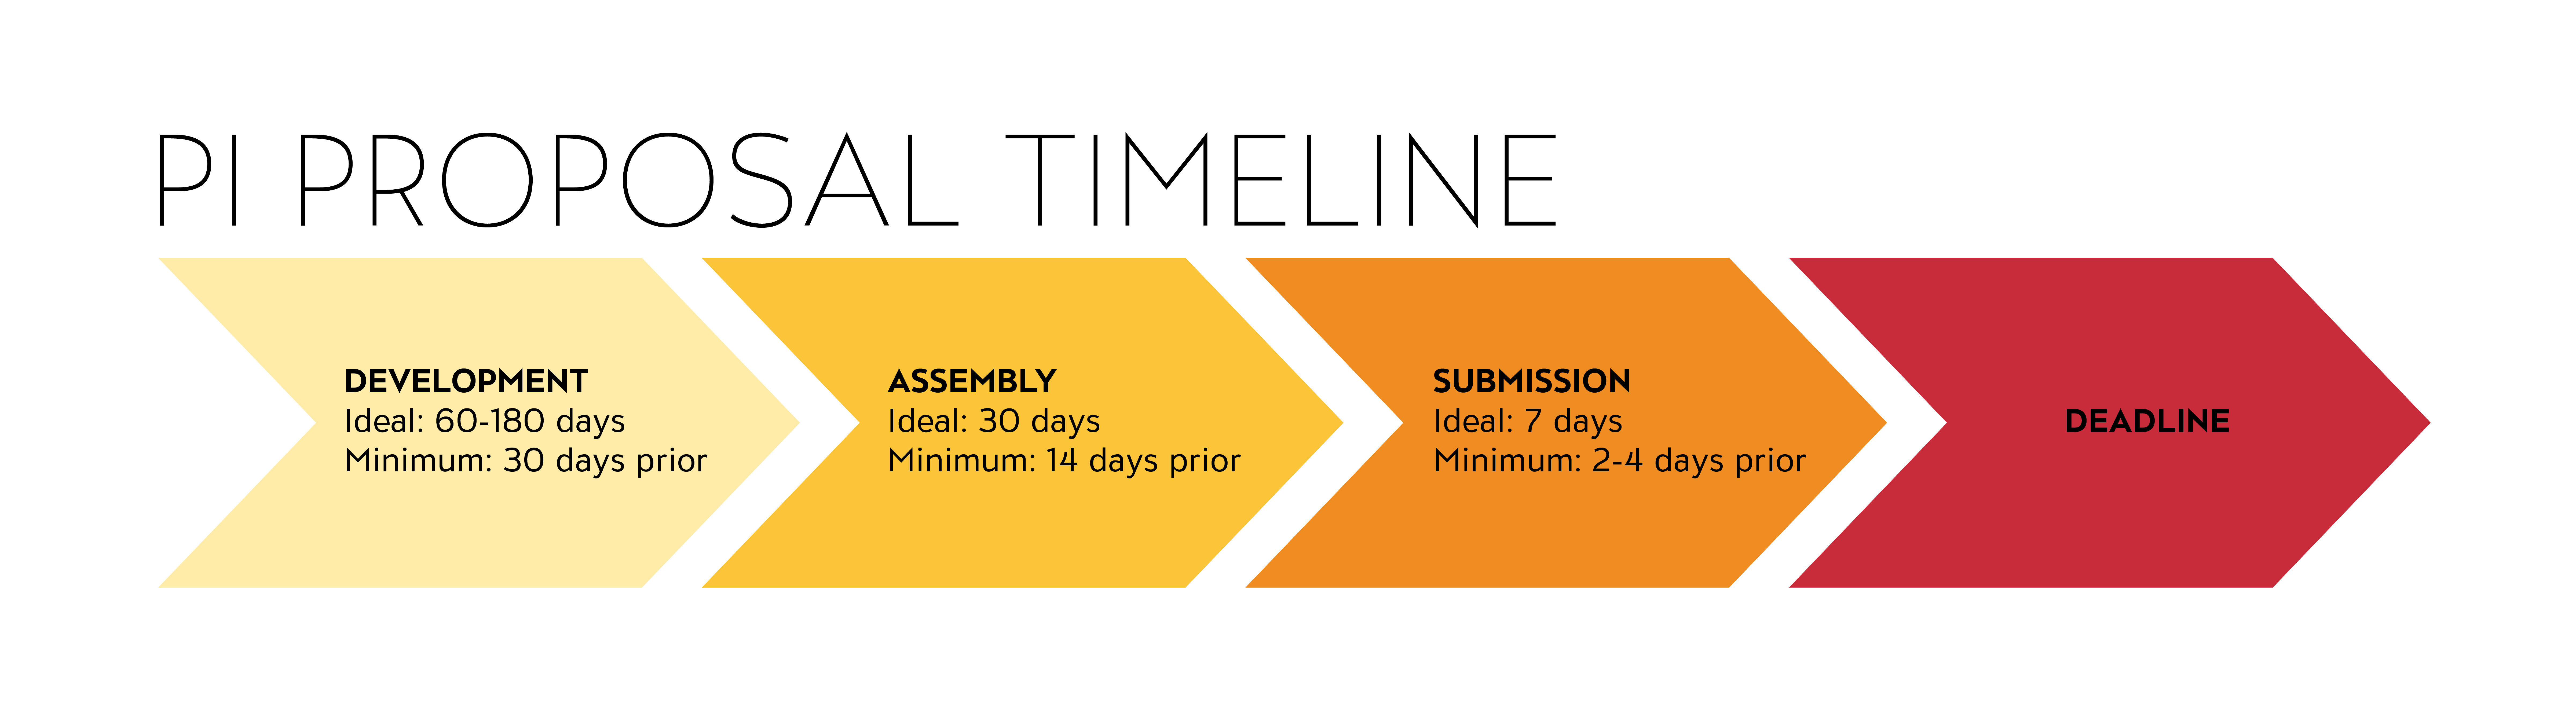 sample research proposal timeline